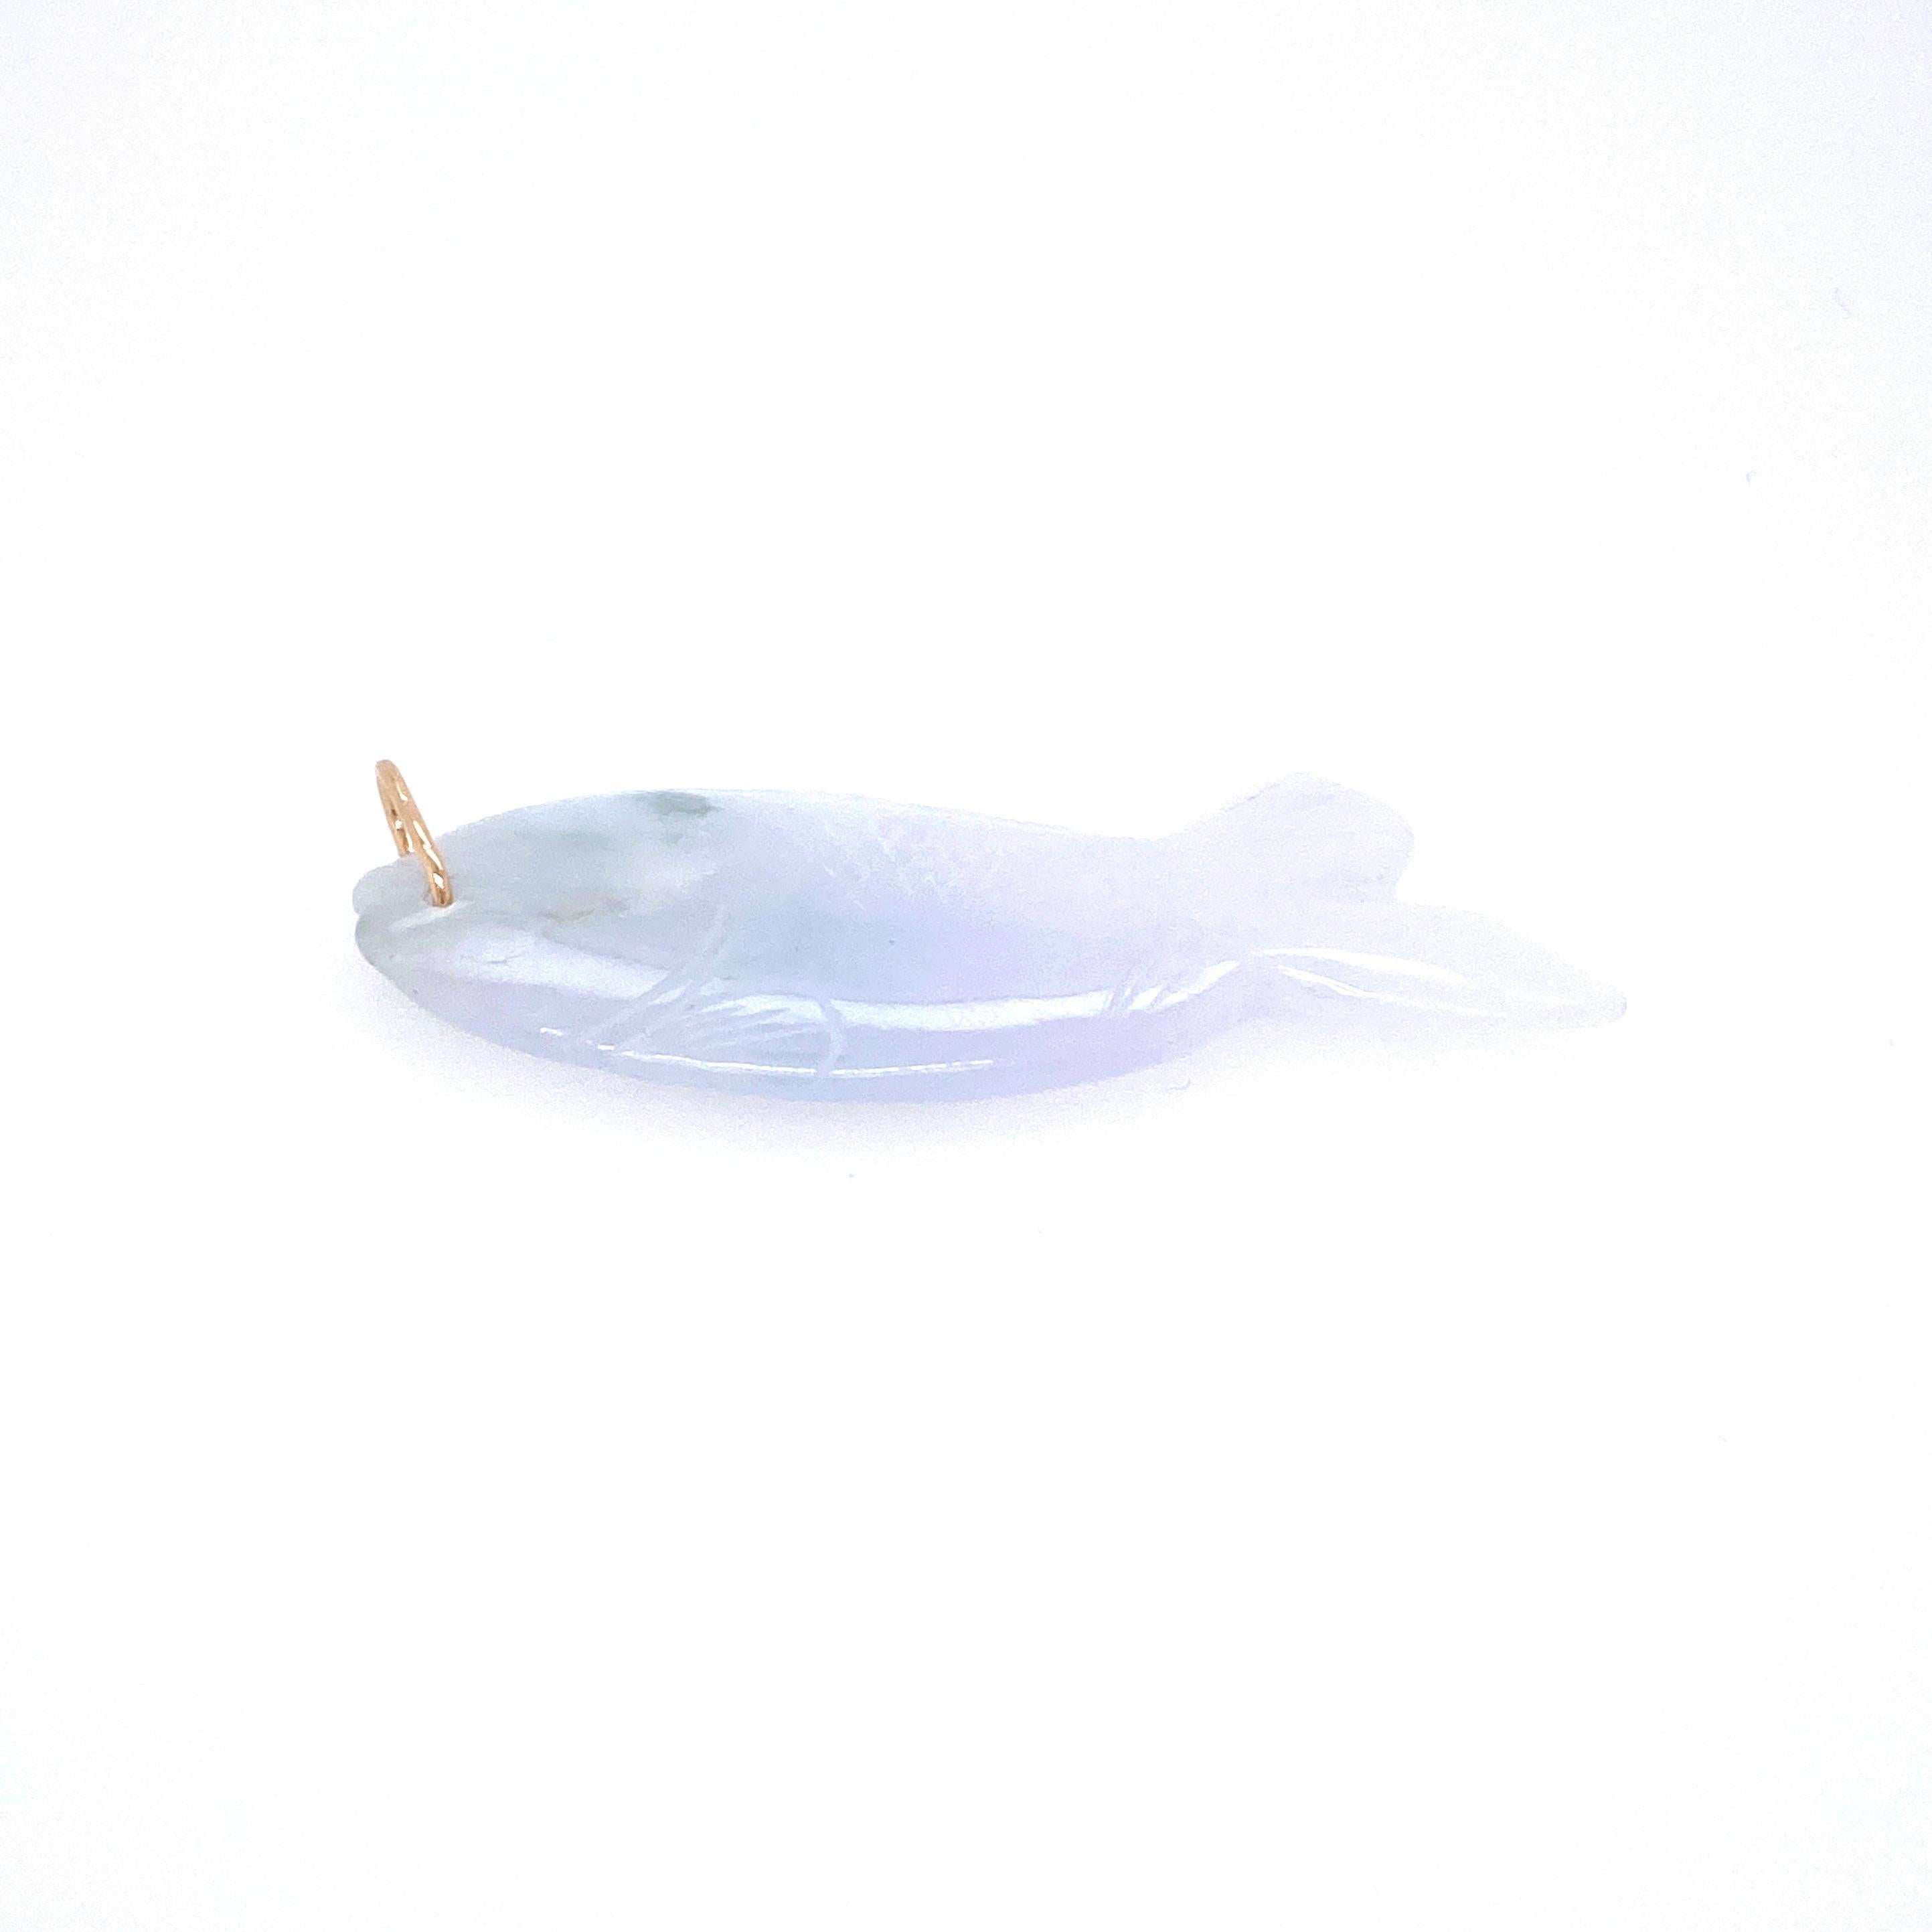 One 14 karat yellow gold (acid tested) carved jade fish pendant, measuring 2 inches x 0.75 inch.  